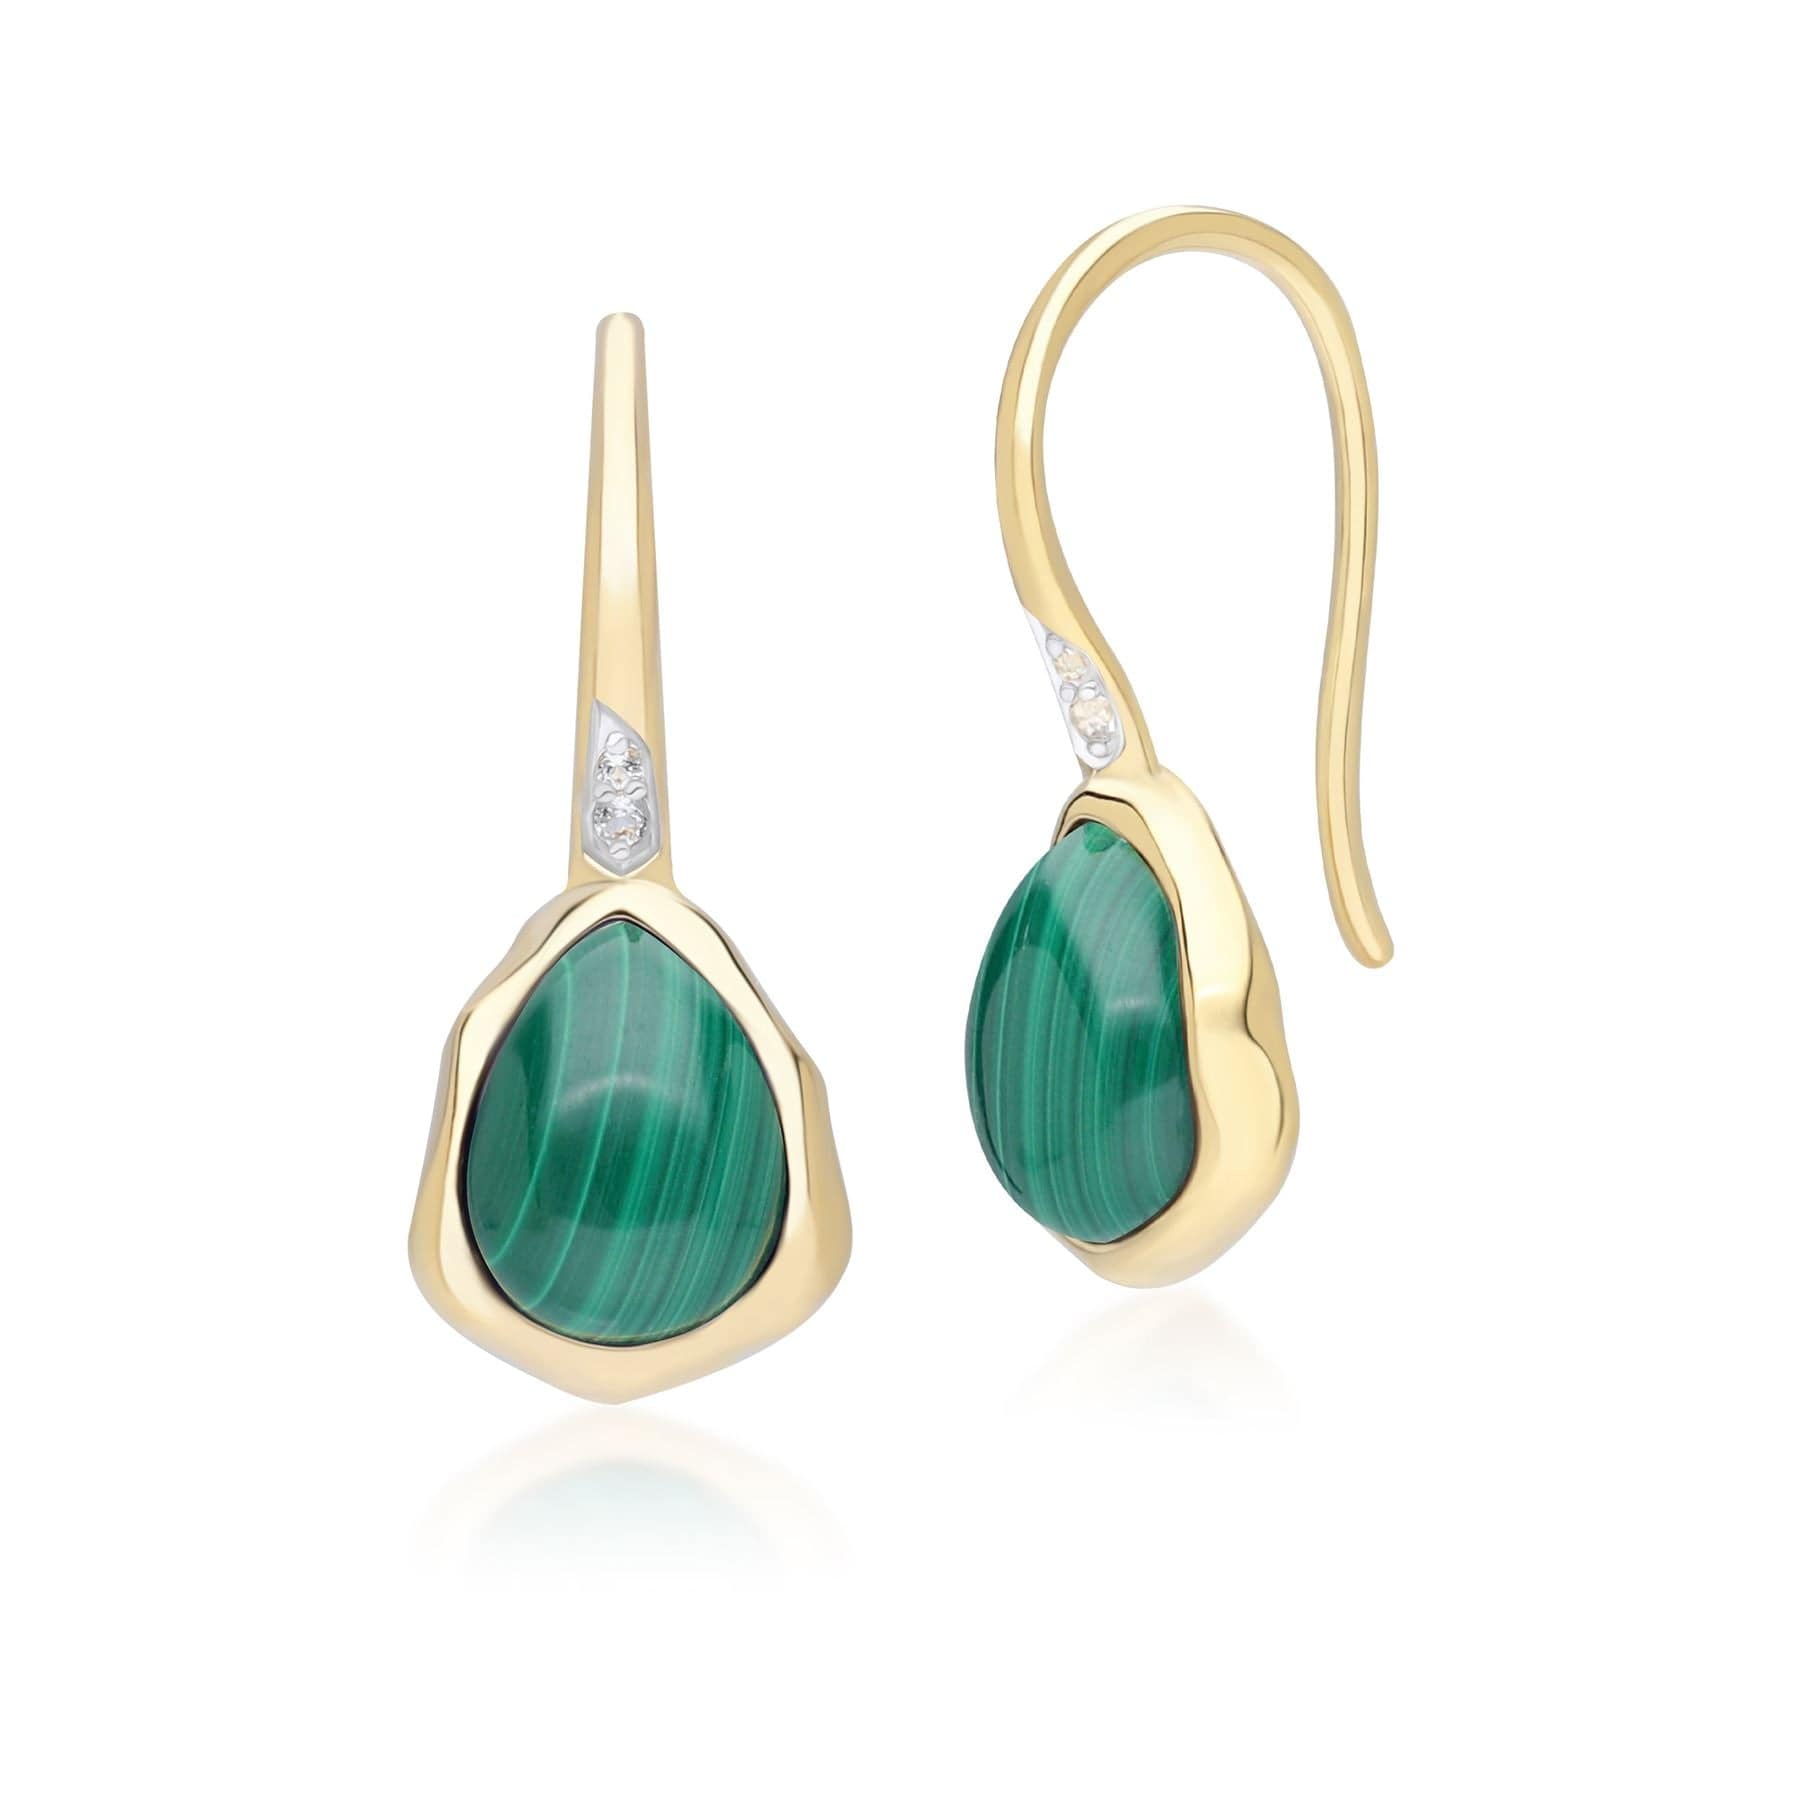 Irregular Malachite & Topaz  Drop Earrings In 18ct Gold Plated SterlIng Silver